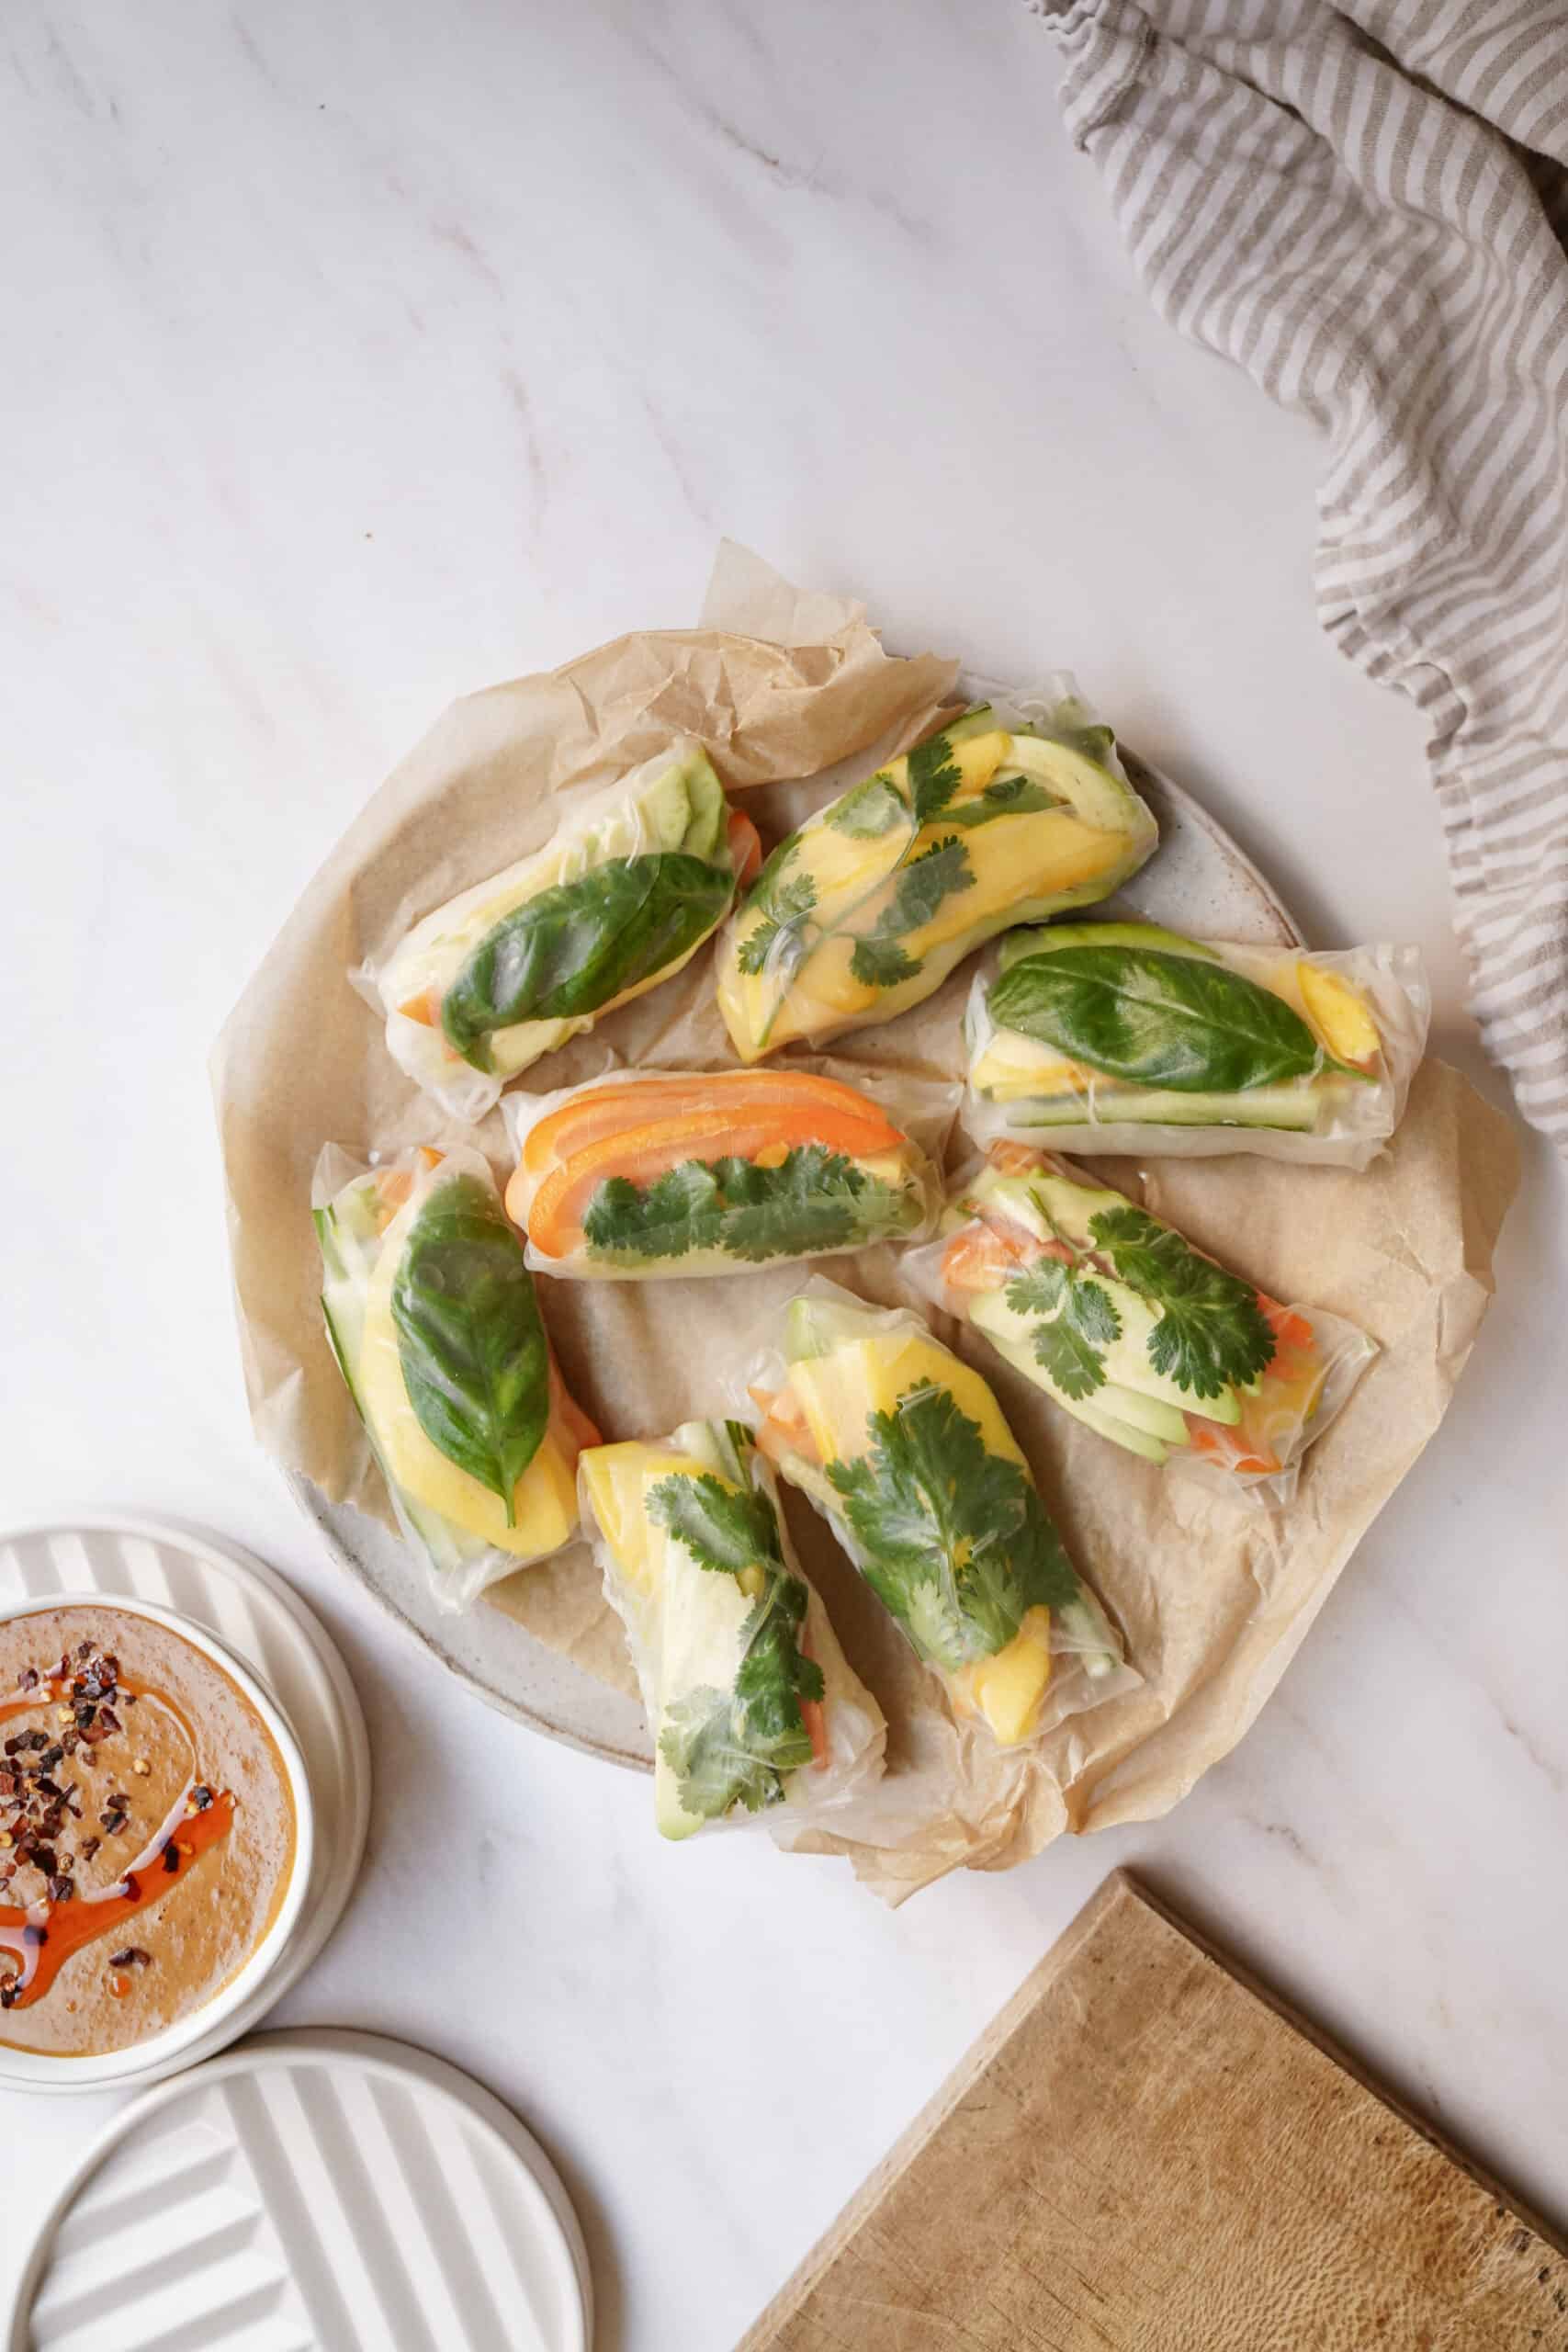 Rice paper rolls on a plate